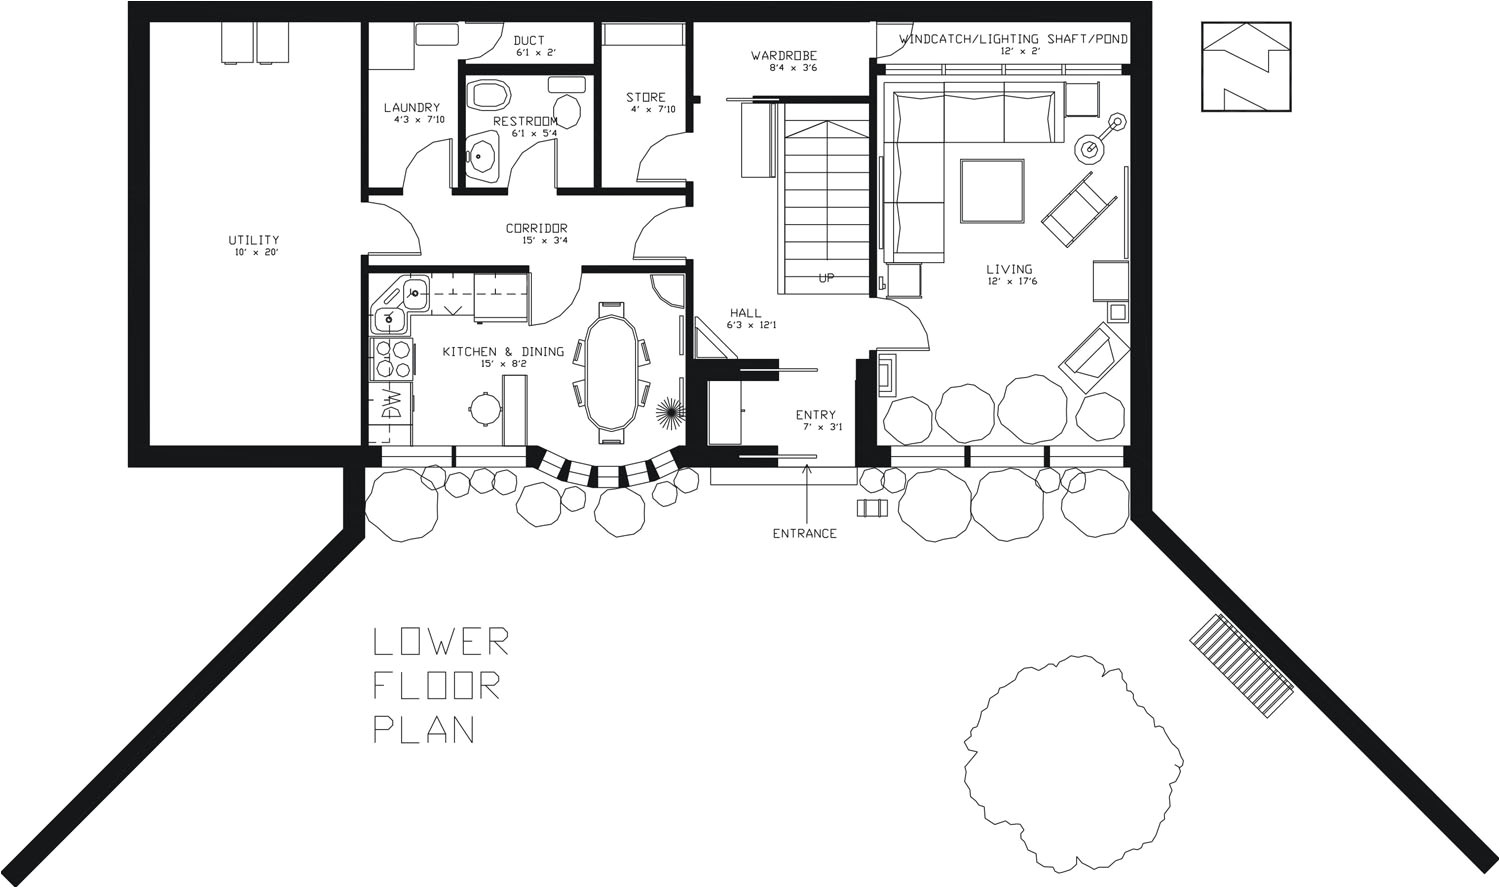 Earth Home Floor Plans Earth Sheltered Passive Home Plan